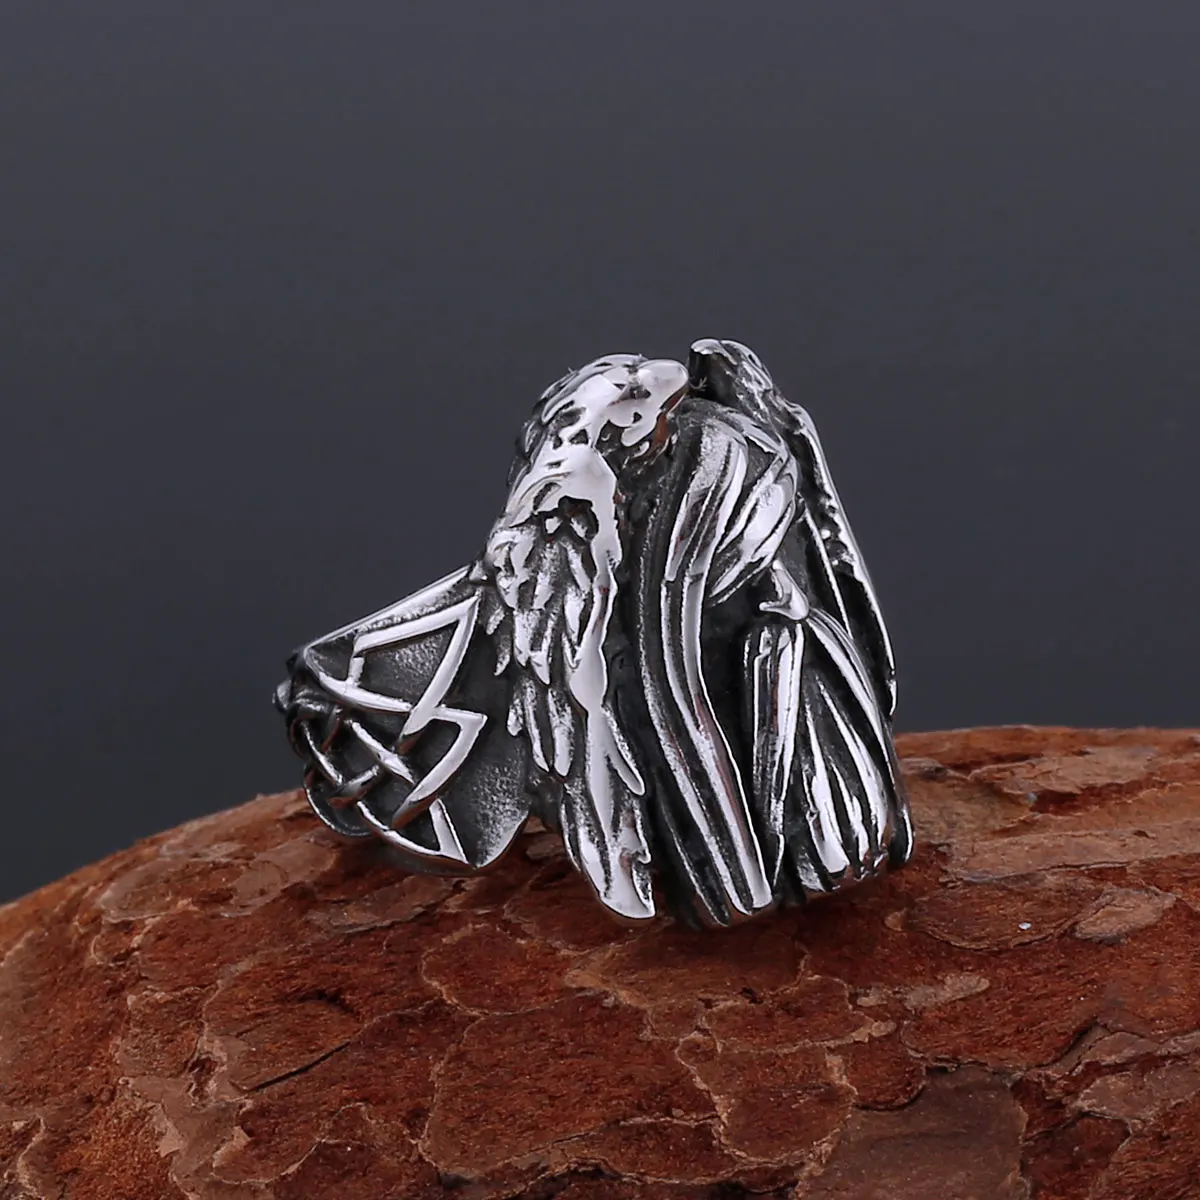 

Boutique Creative Stainless Steel Egyptian Mythological Viking Ring Men's Nordic Vintage Ring Jewelry Amulet Gift Package Mail